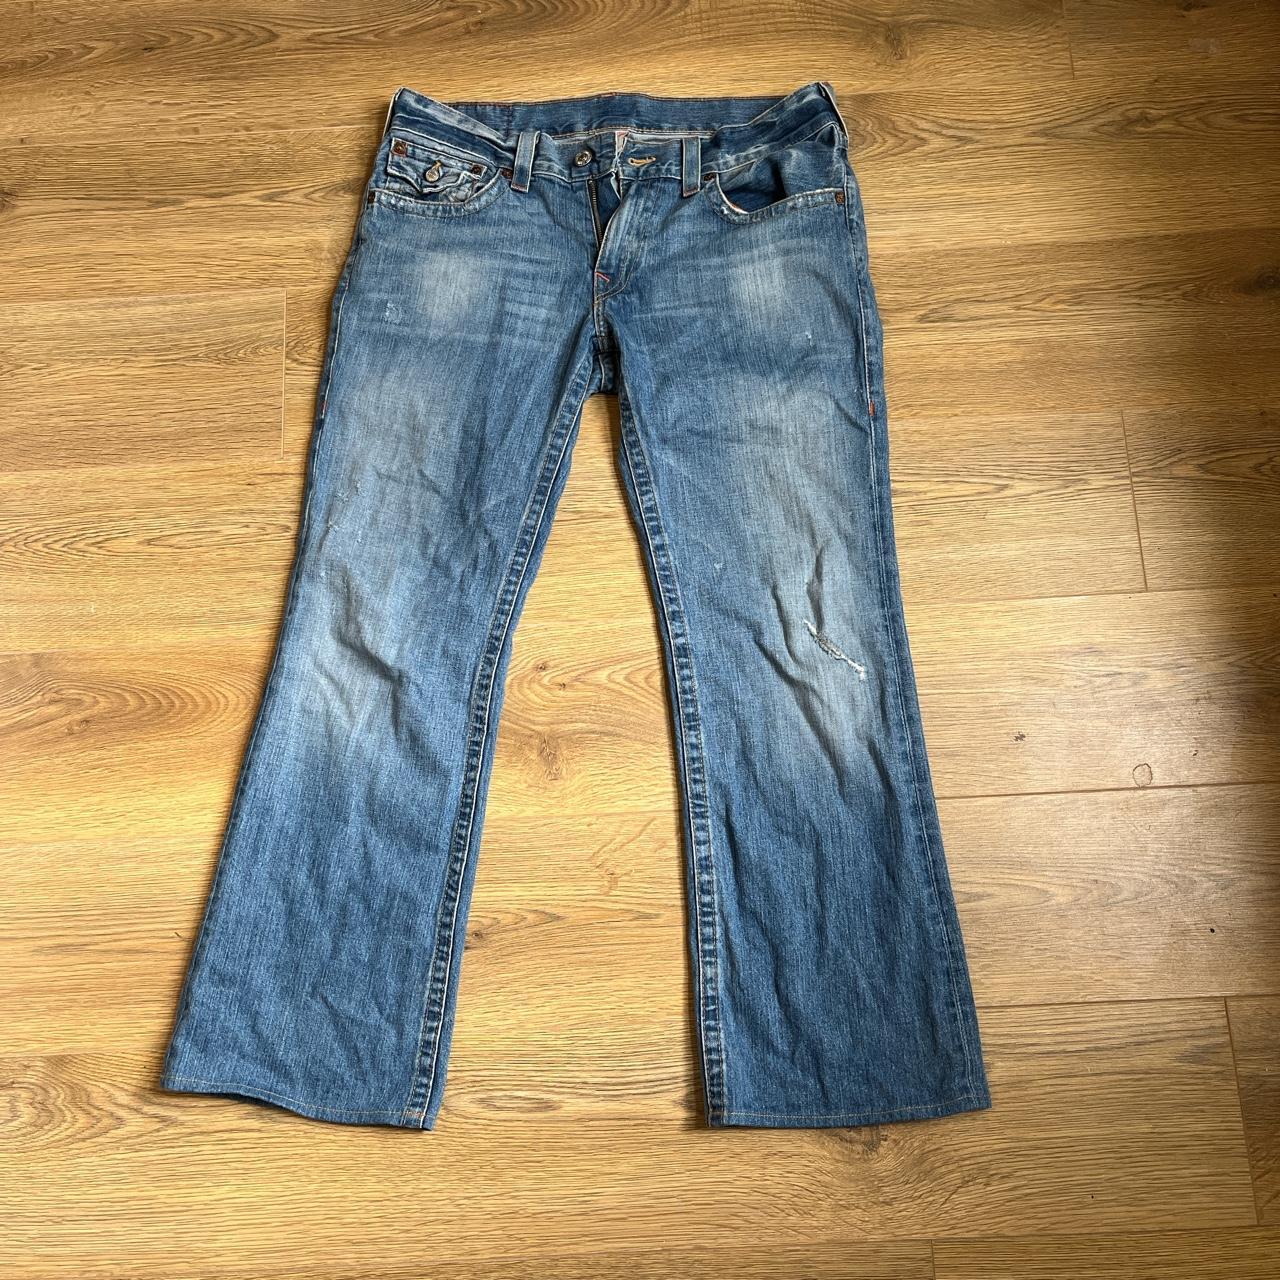 True Religion jeans with dragon embroidery on the... - Depop